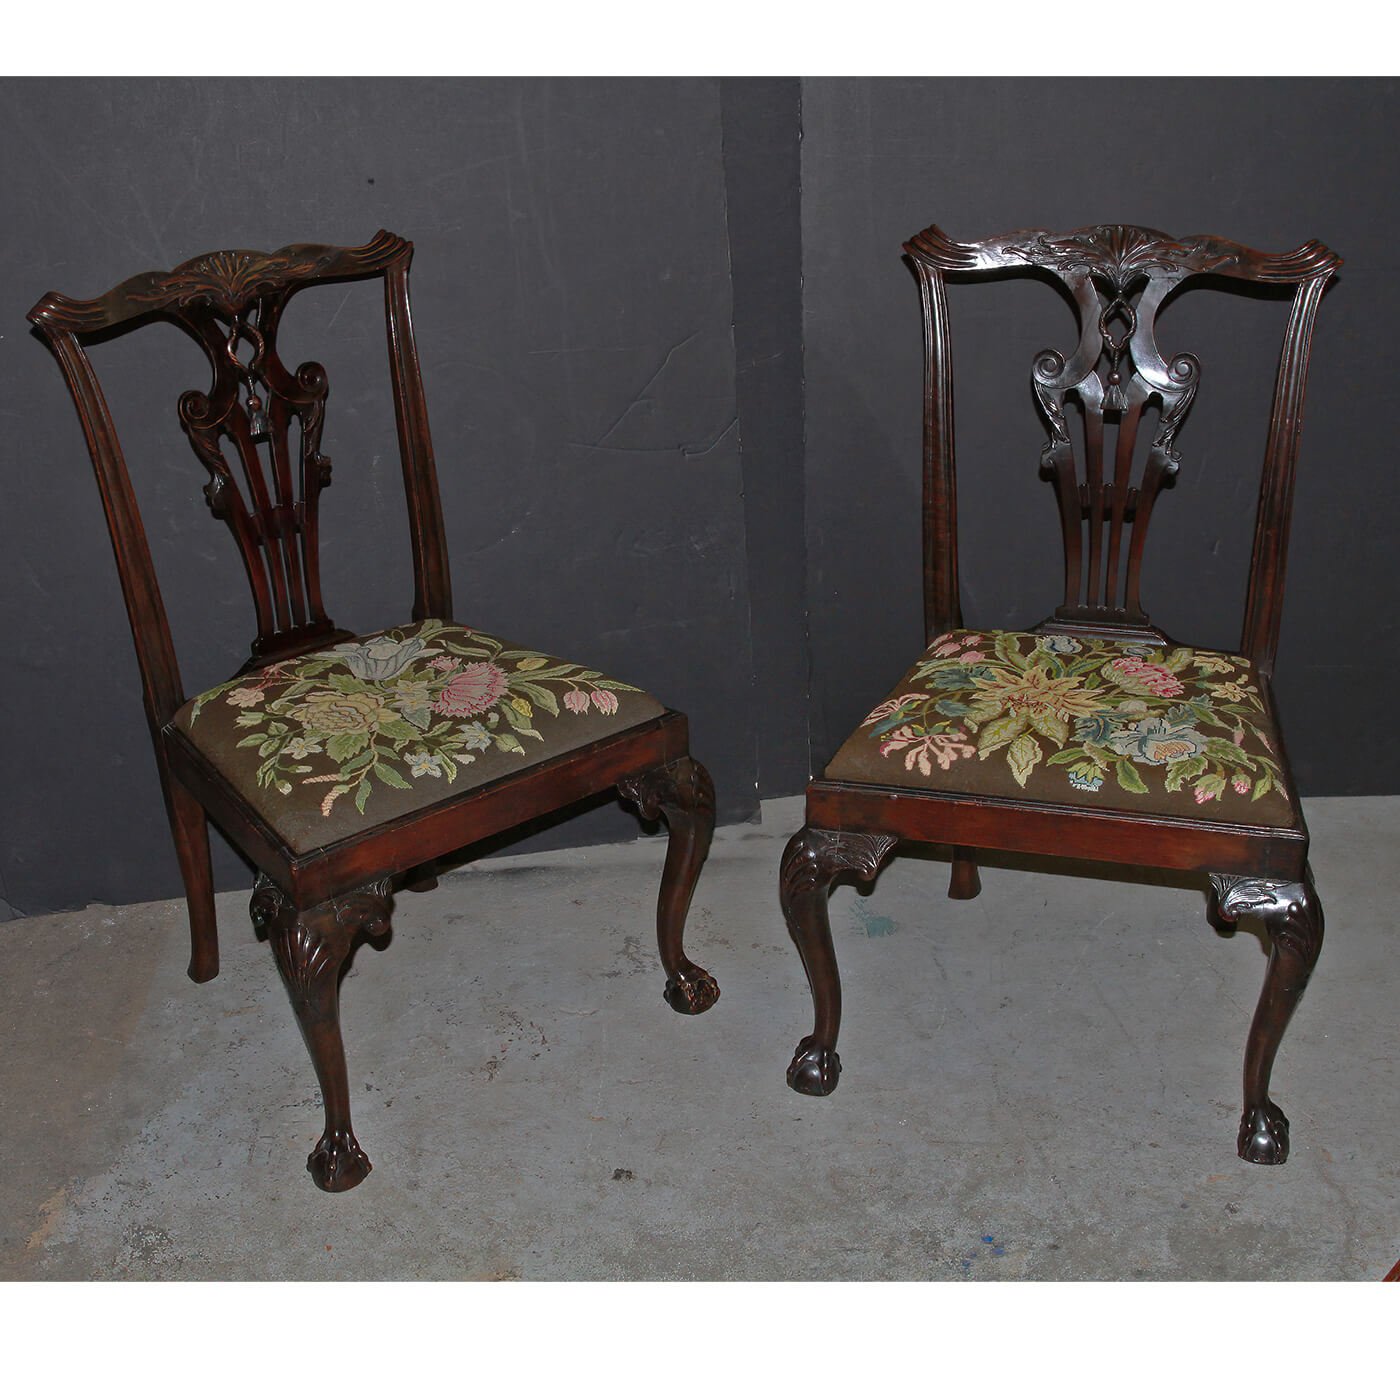 Pair of Chippendale Mahogany Side Chairs - English Georgian America